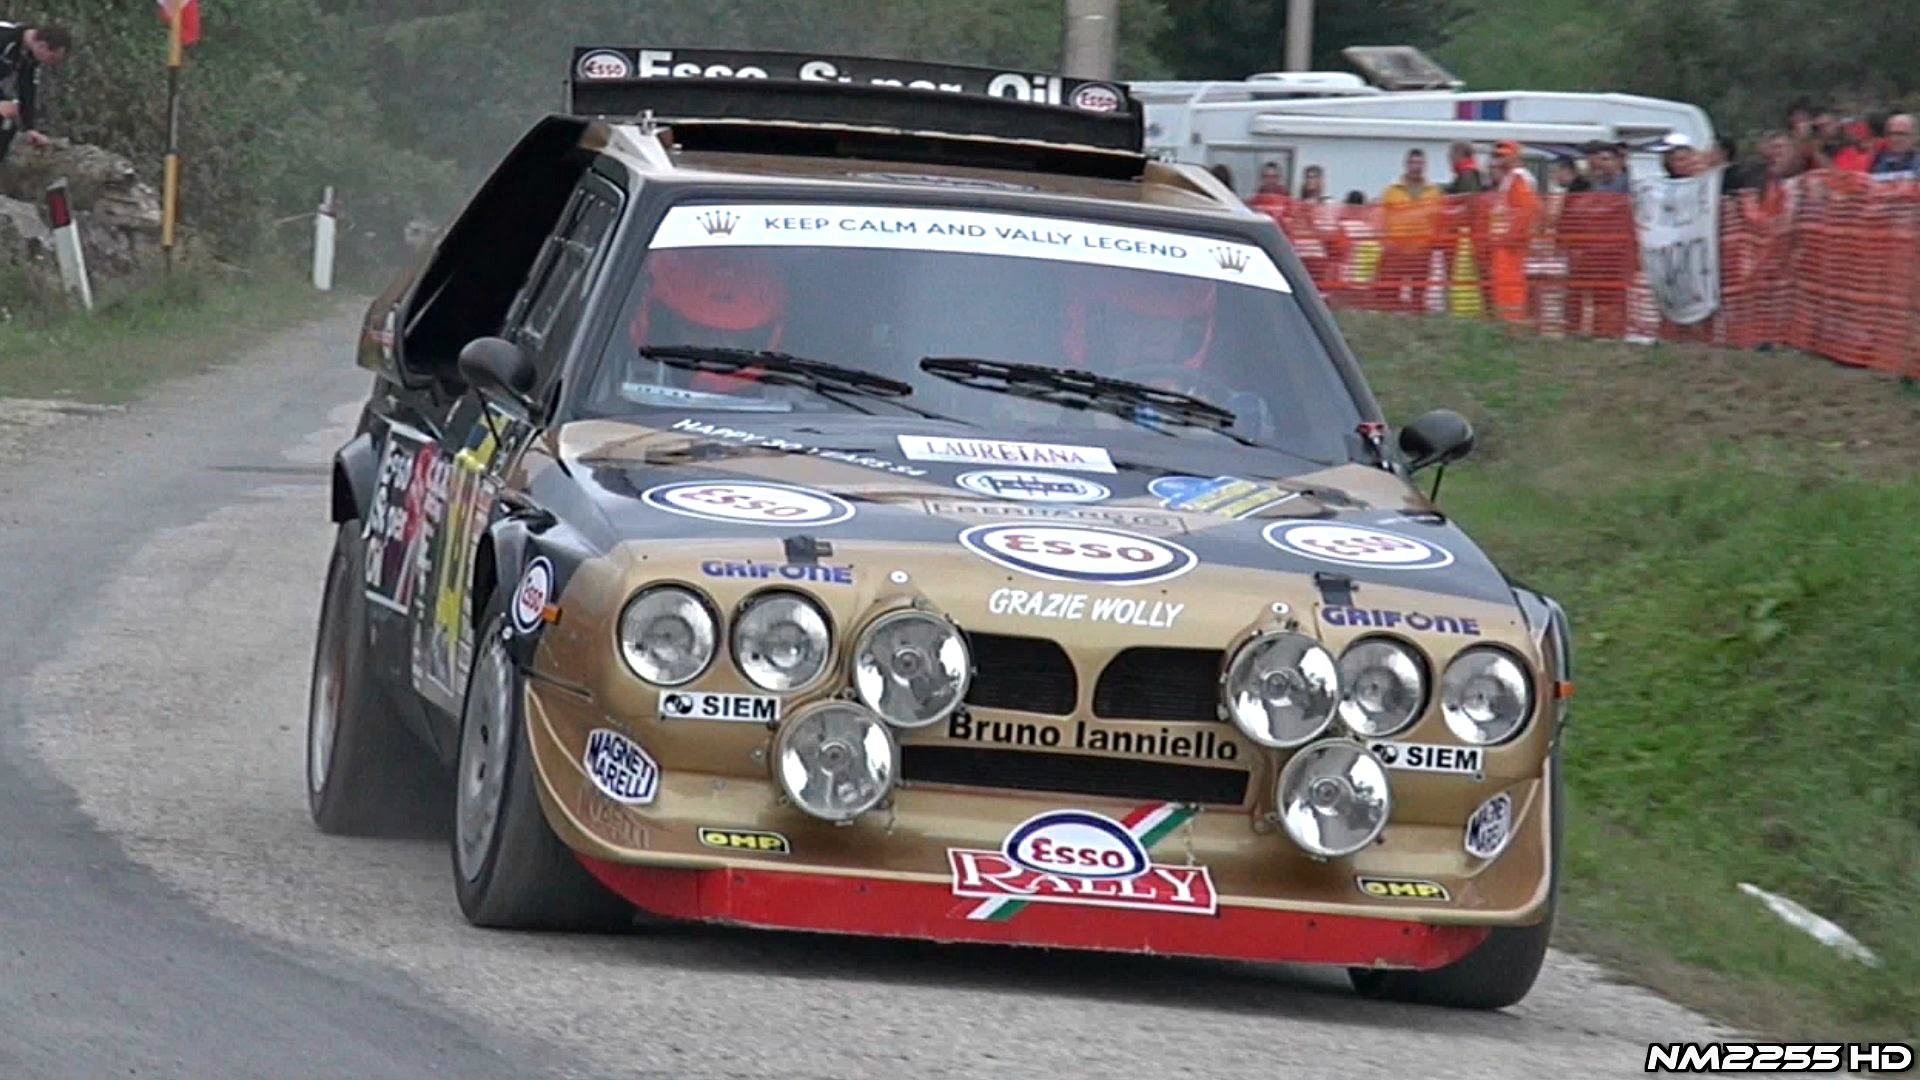 1920x1080 HQ Lancia Delta S4 Wallpapers | File 273.51Kb